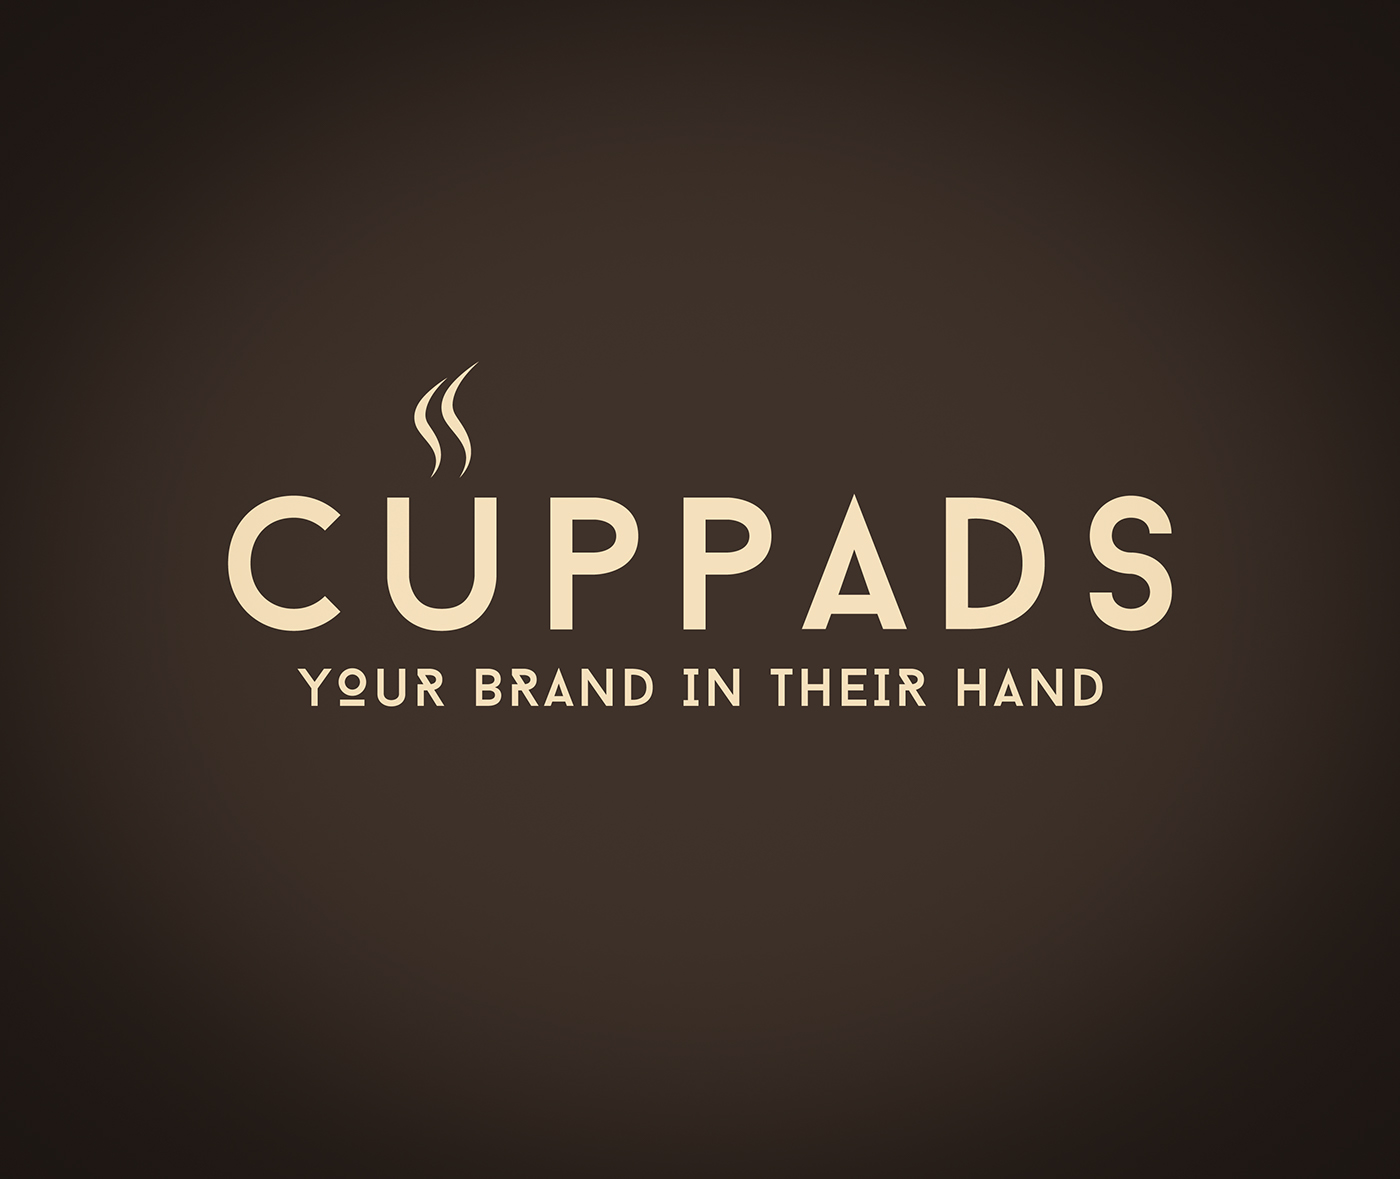 logo Coffee cups ads Cuppads business card Stationery coffee cups advert poster slogan brown cream